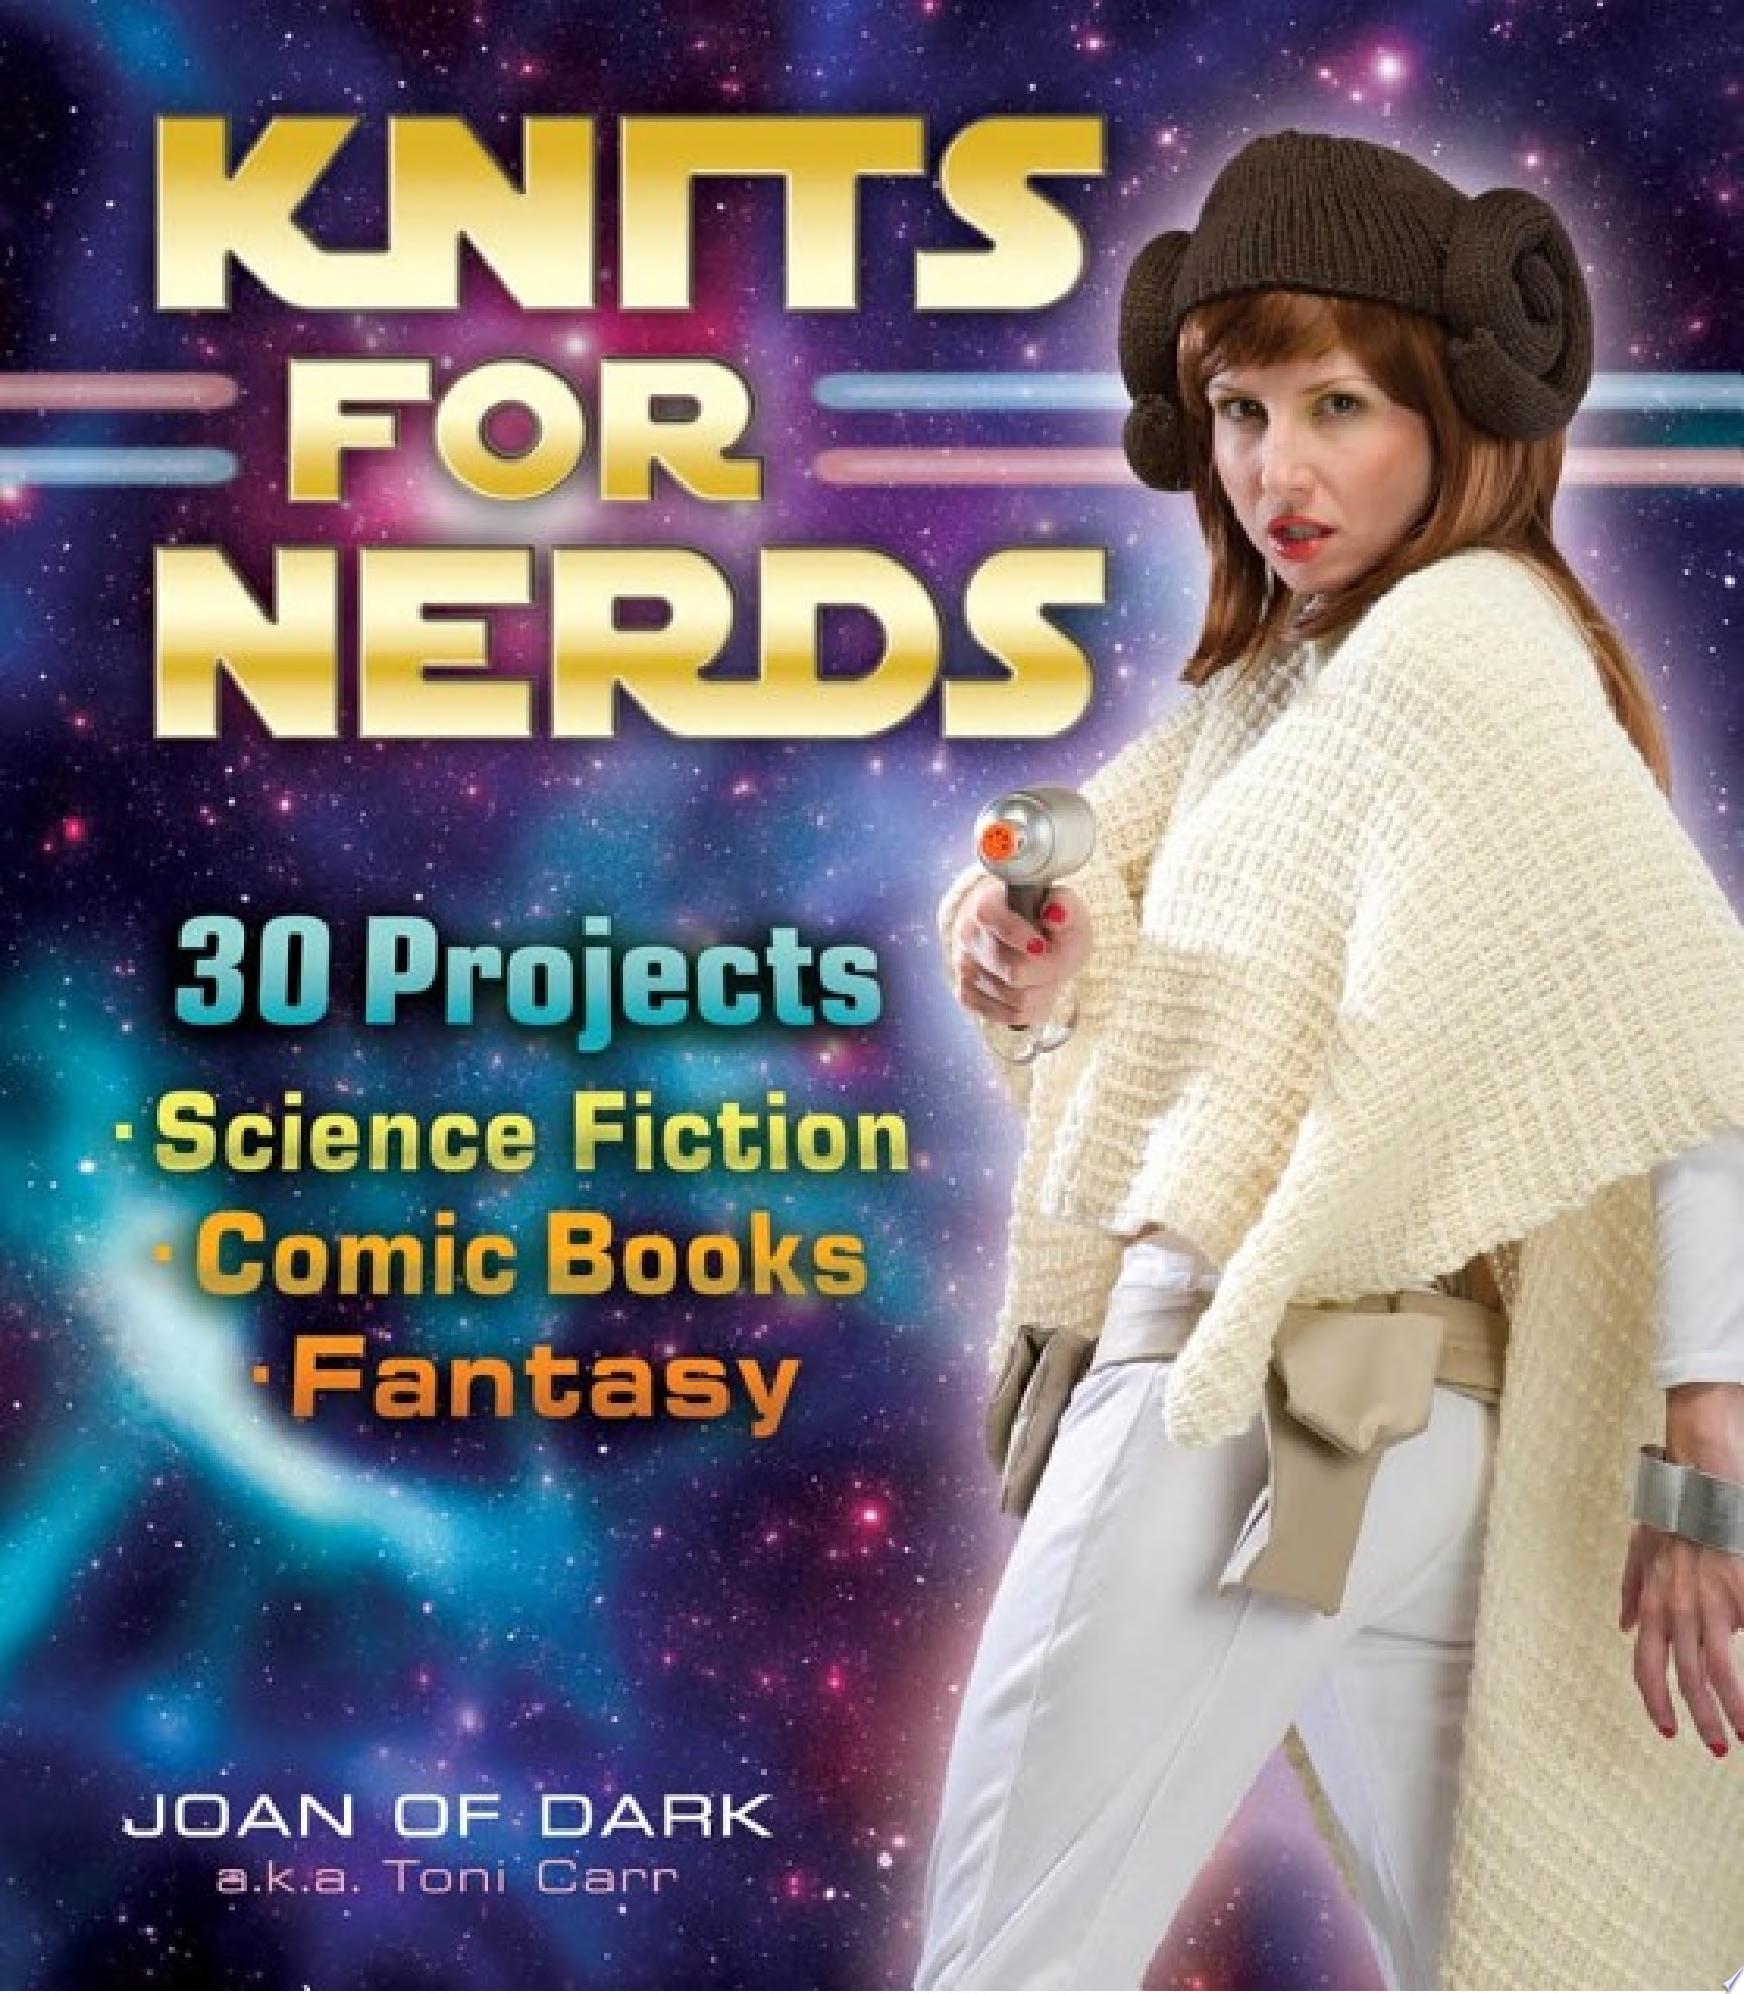 Image for "Knits for Nerds"